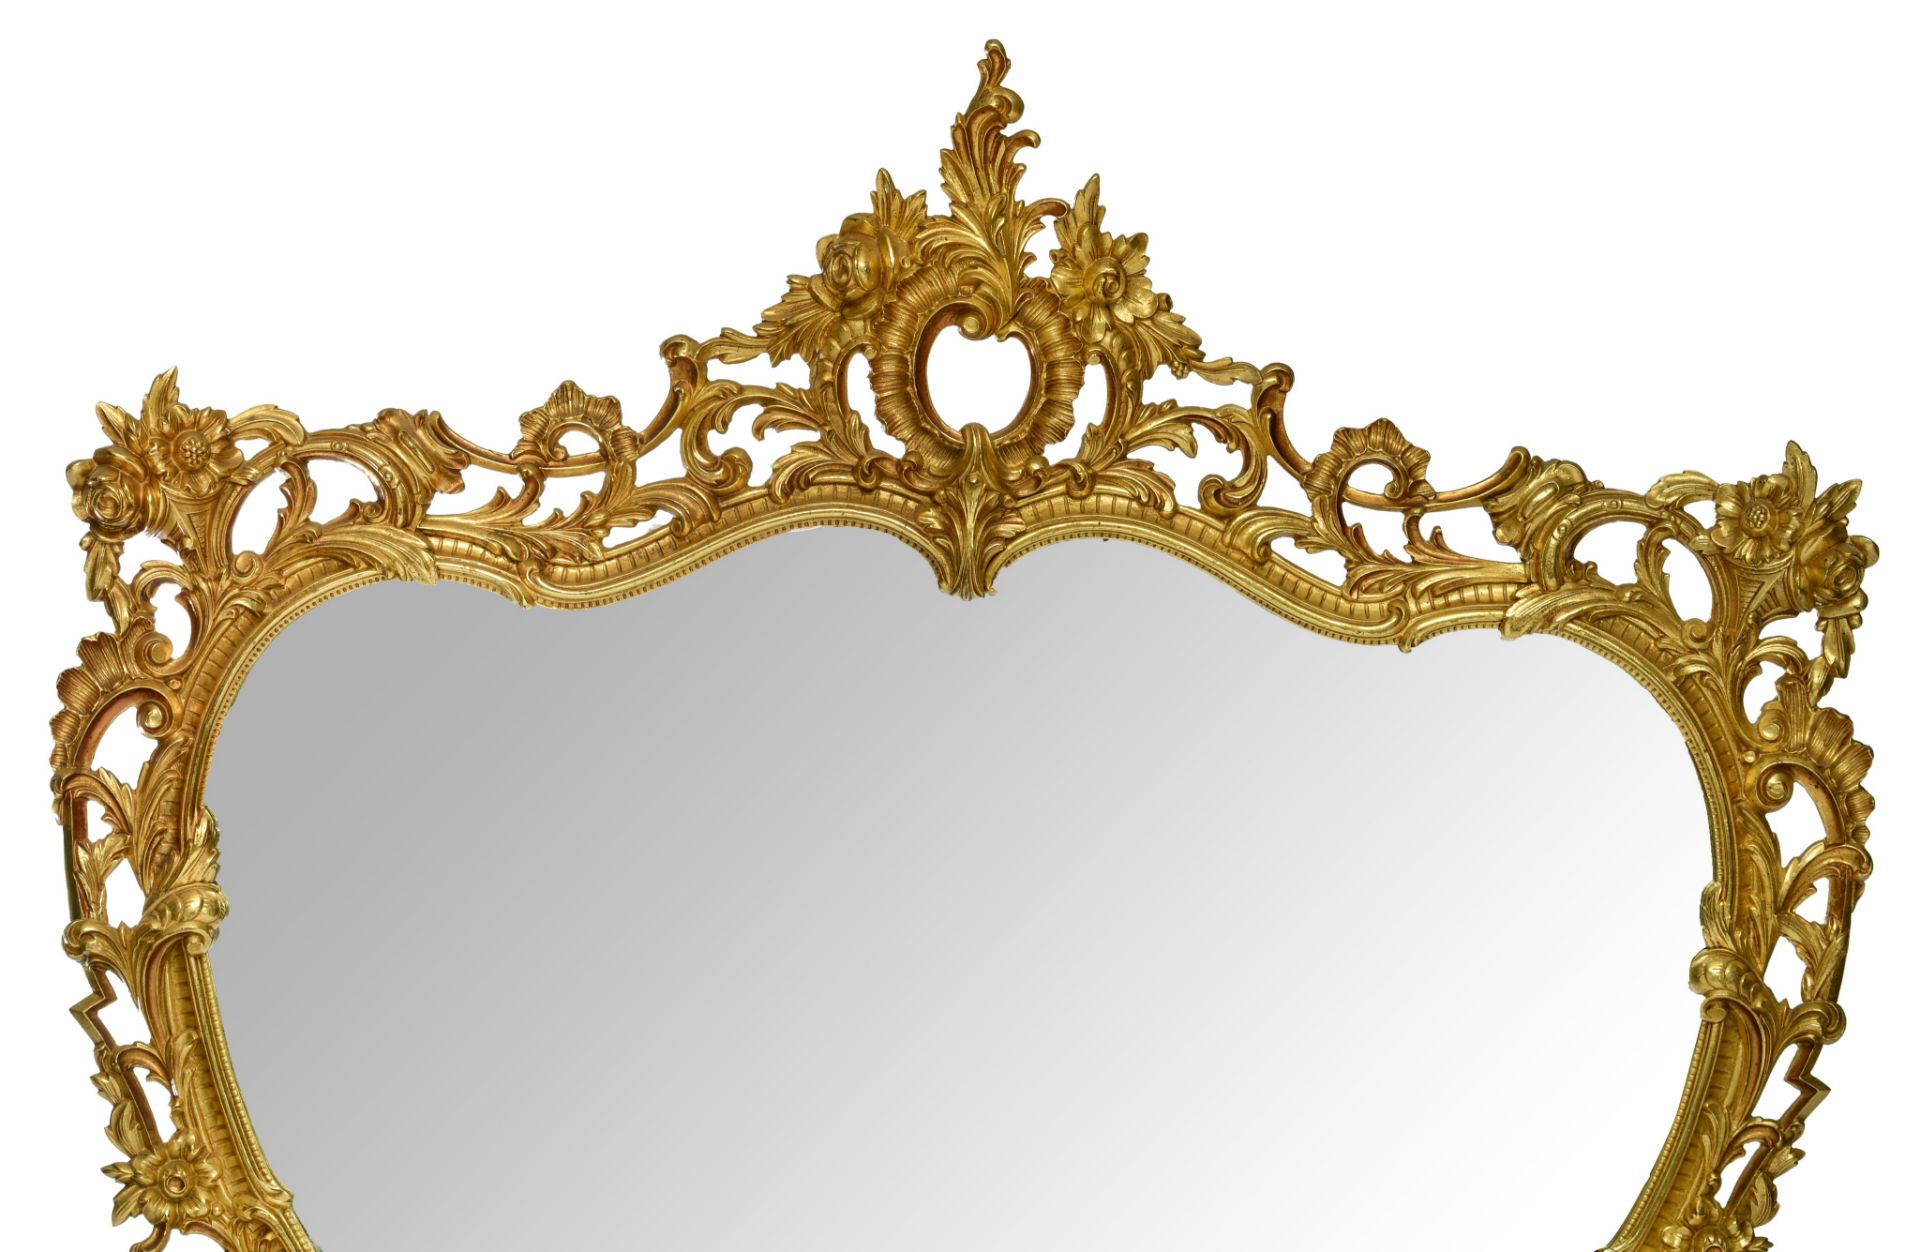 A large Rococo style gilt metal console table and mirror, H 125 - W 110 cm (the mirror) - H 85 - W 1 - Image 11 of 12